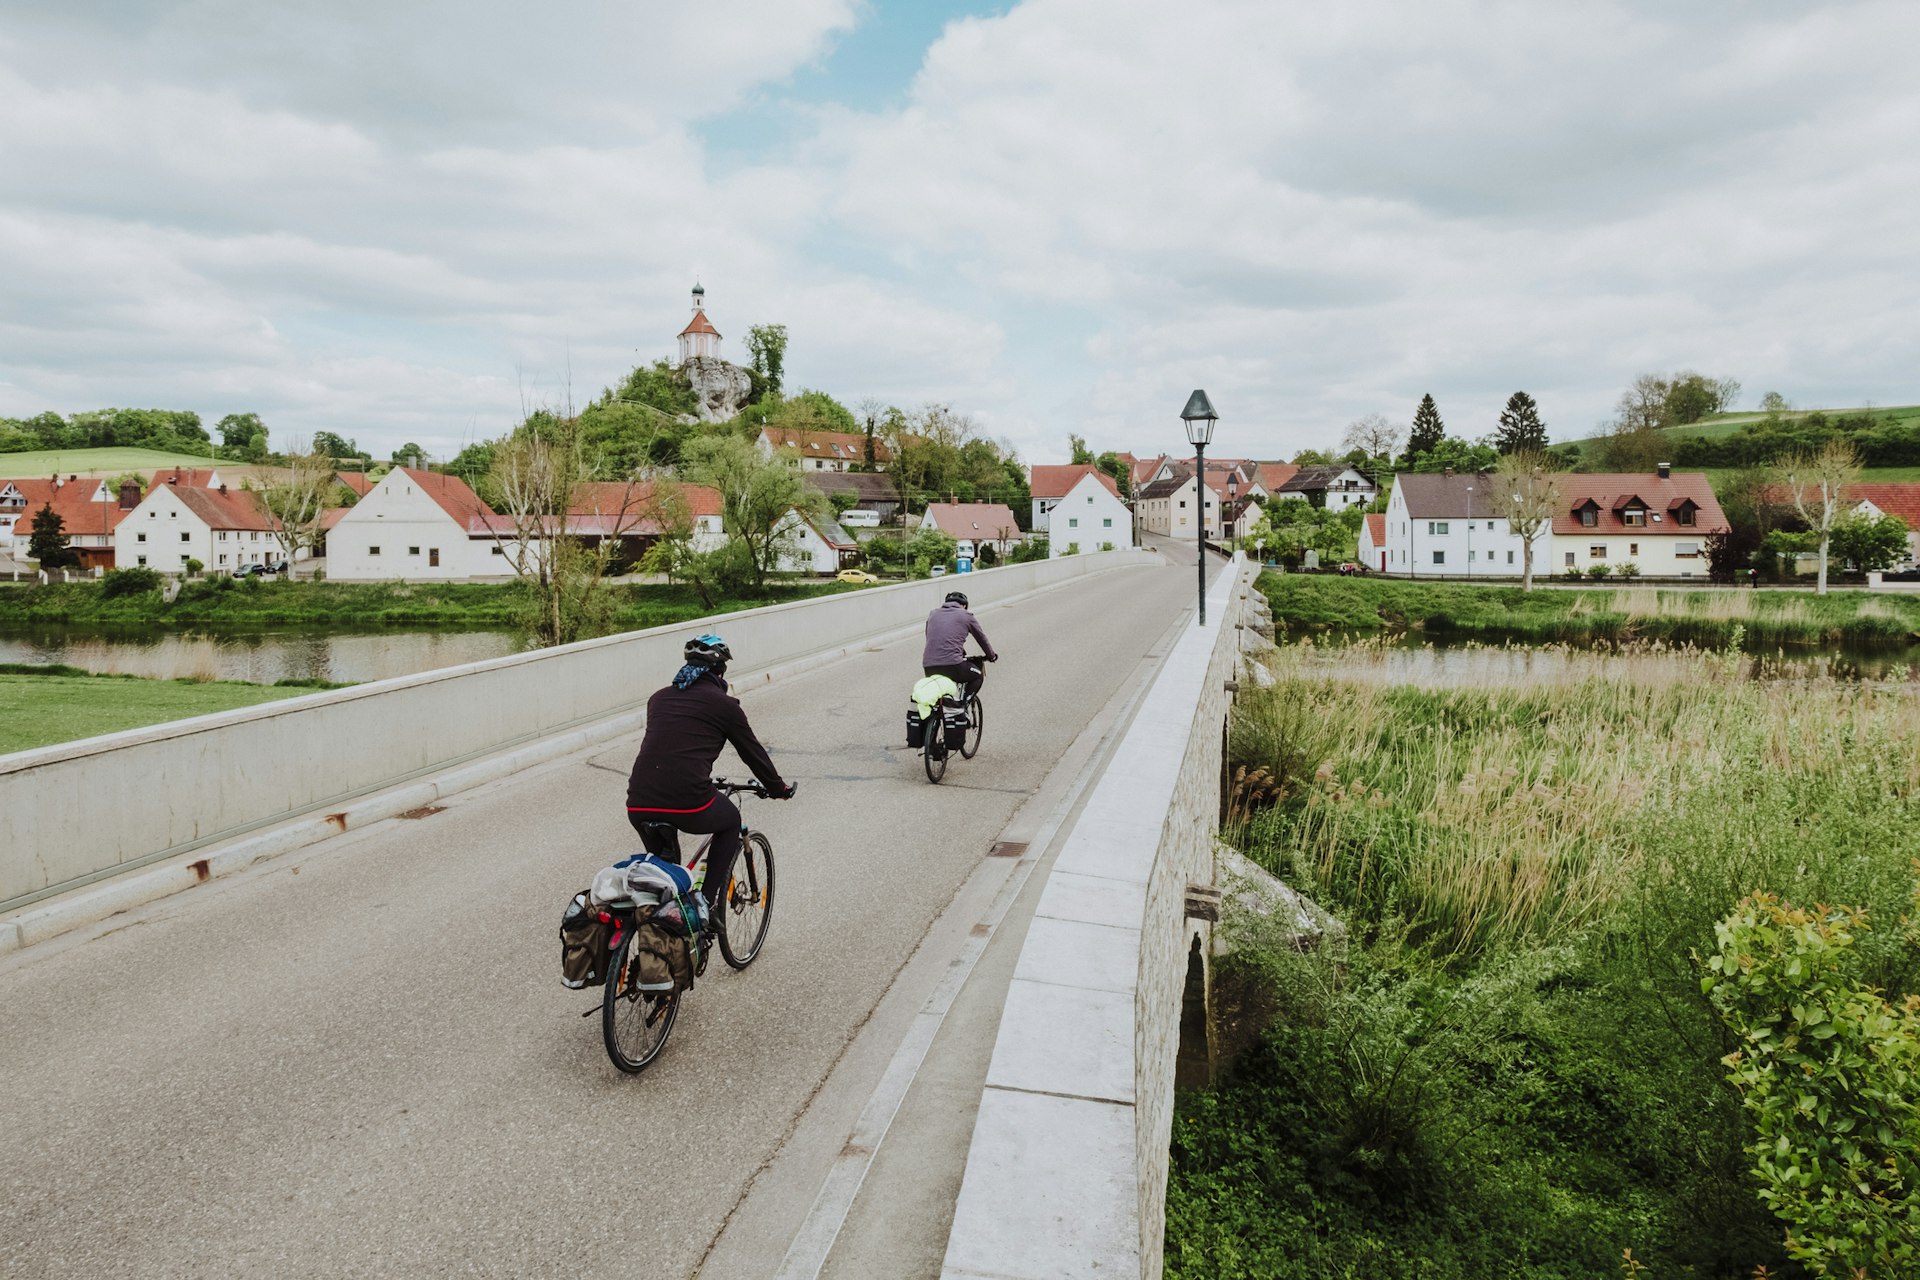 Two cyclists on bikes with luggage ride across a bridge entering a medieval town